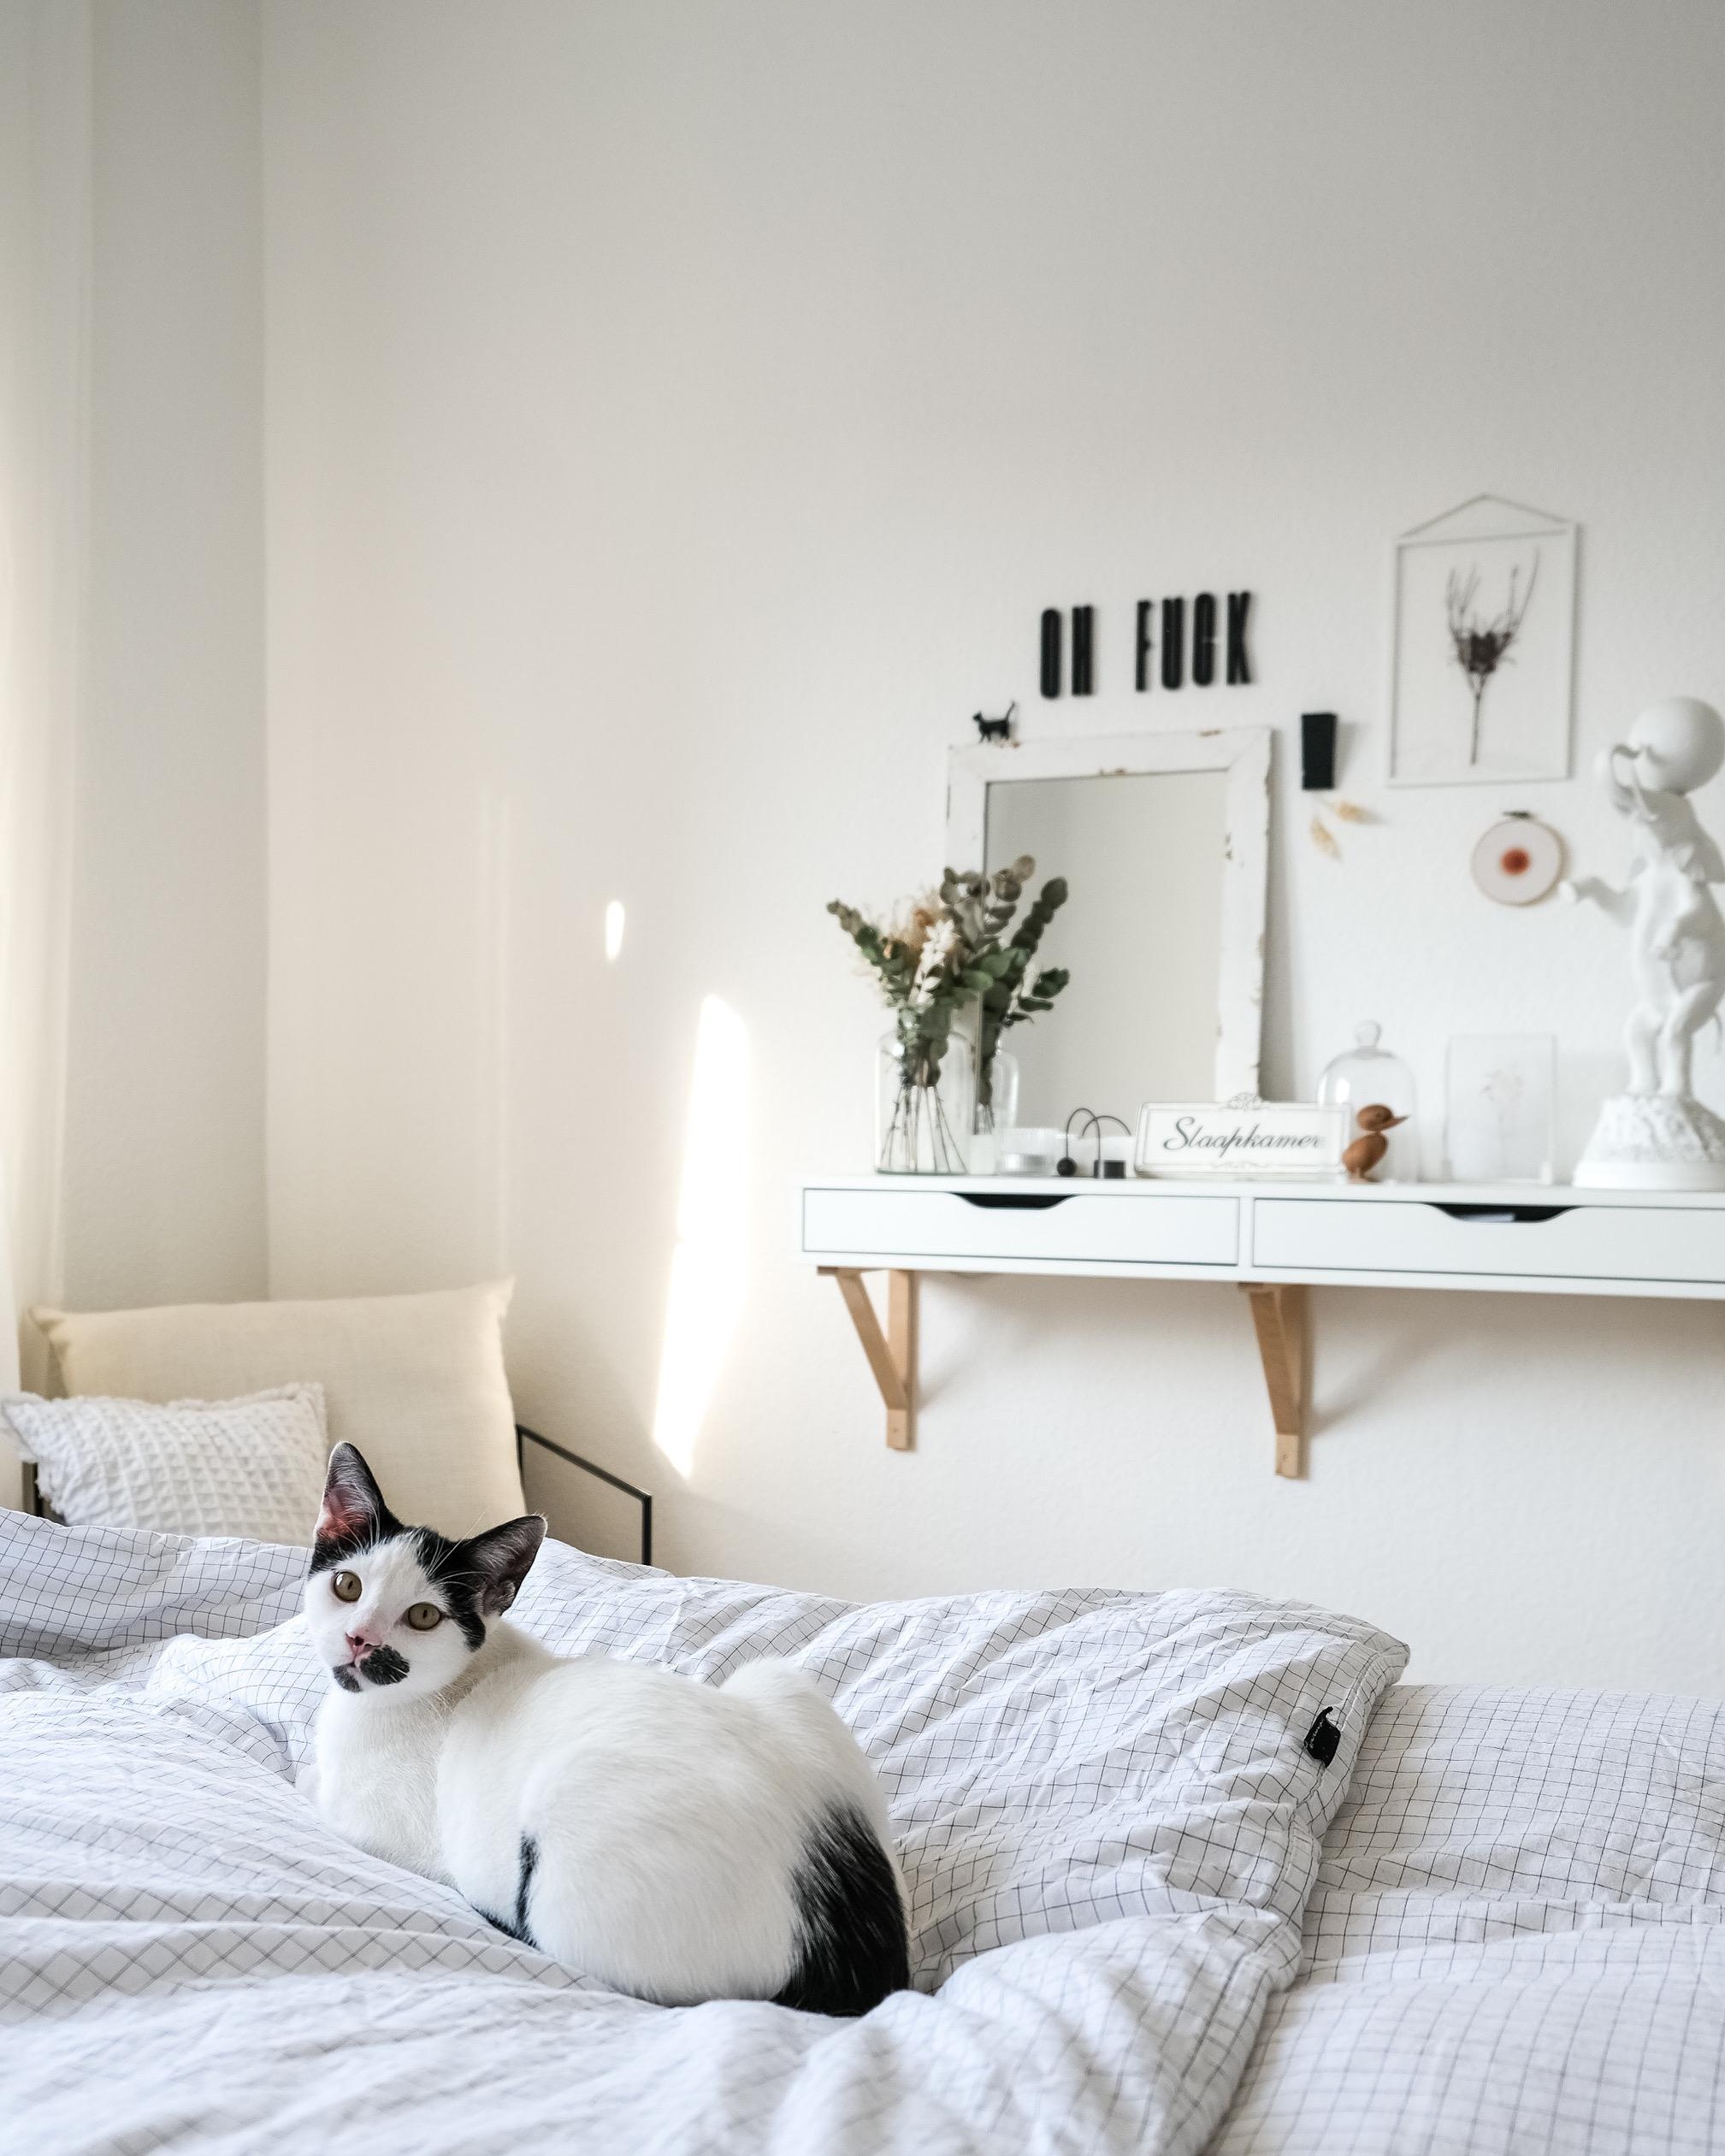 Moin Moin.

#kater #schlafzimmer #nippes #solebich #couchstyle #altbau #altbauliebe